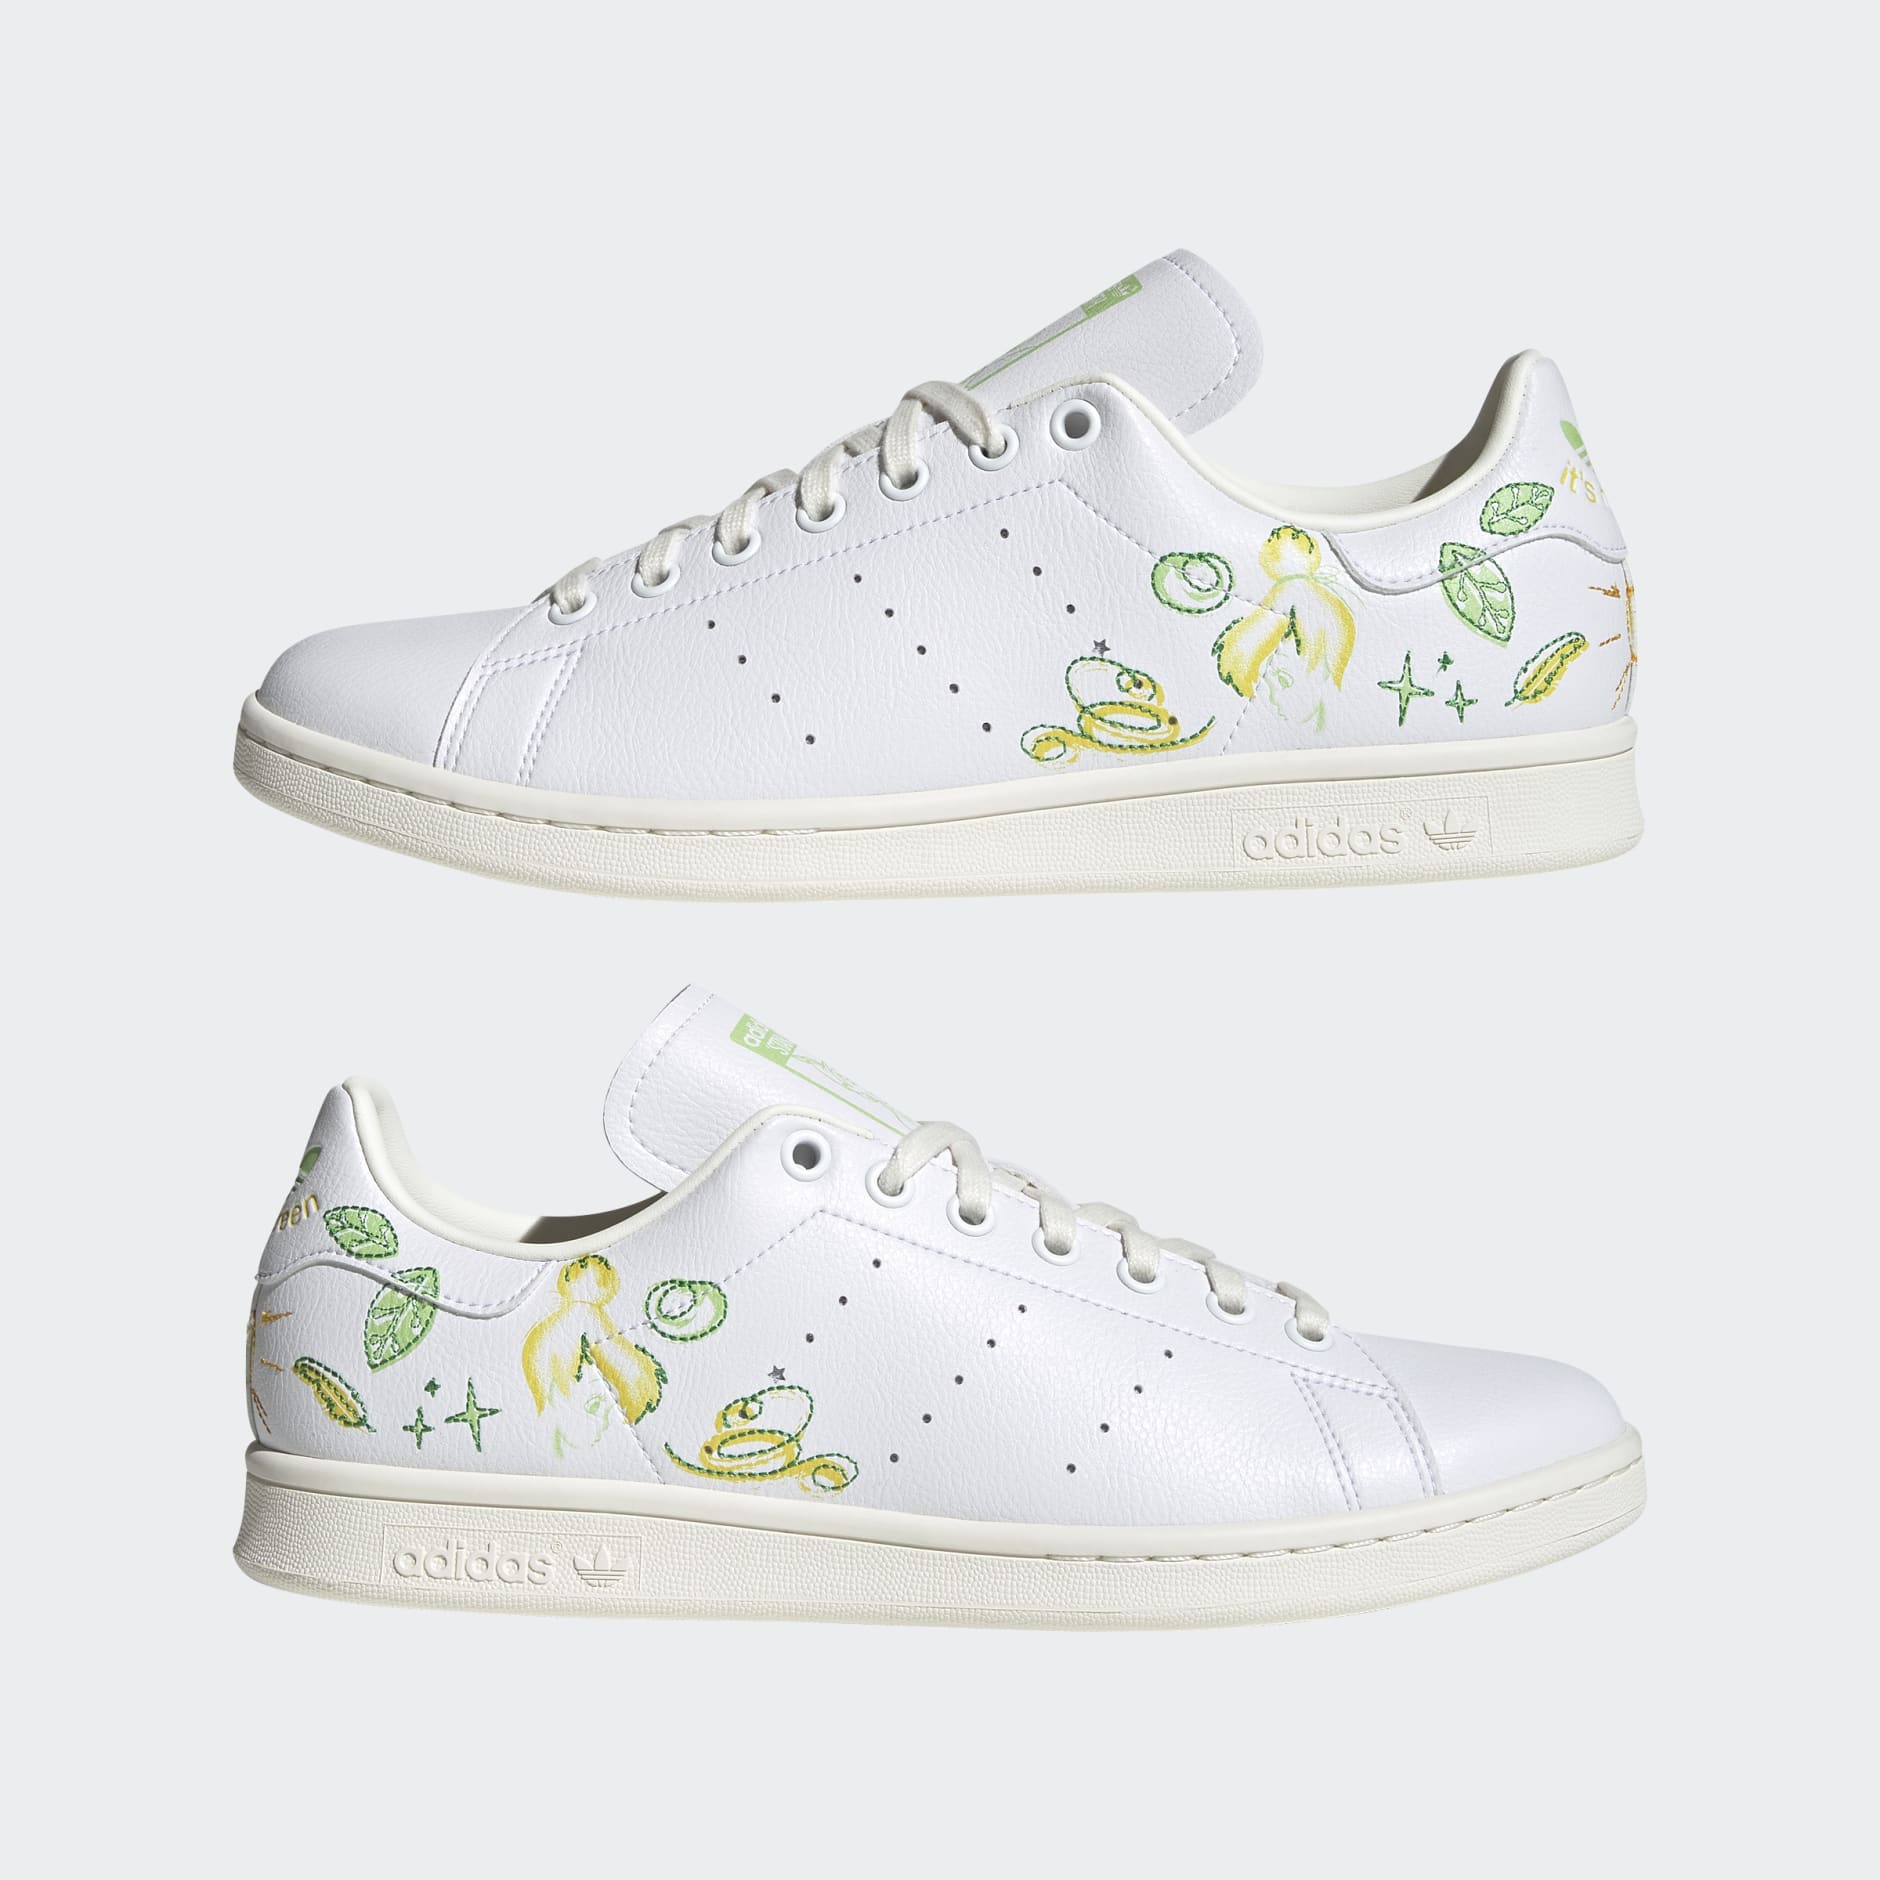 Peter Pan and Tinker Bell Stan Smith